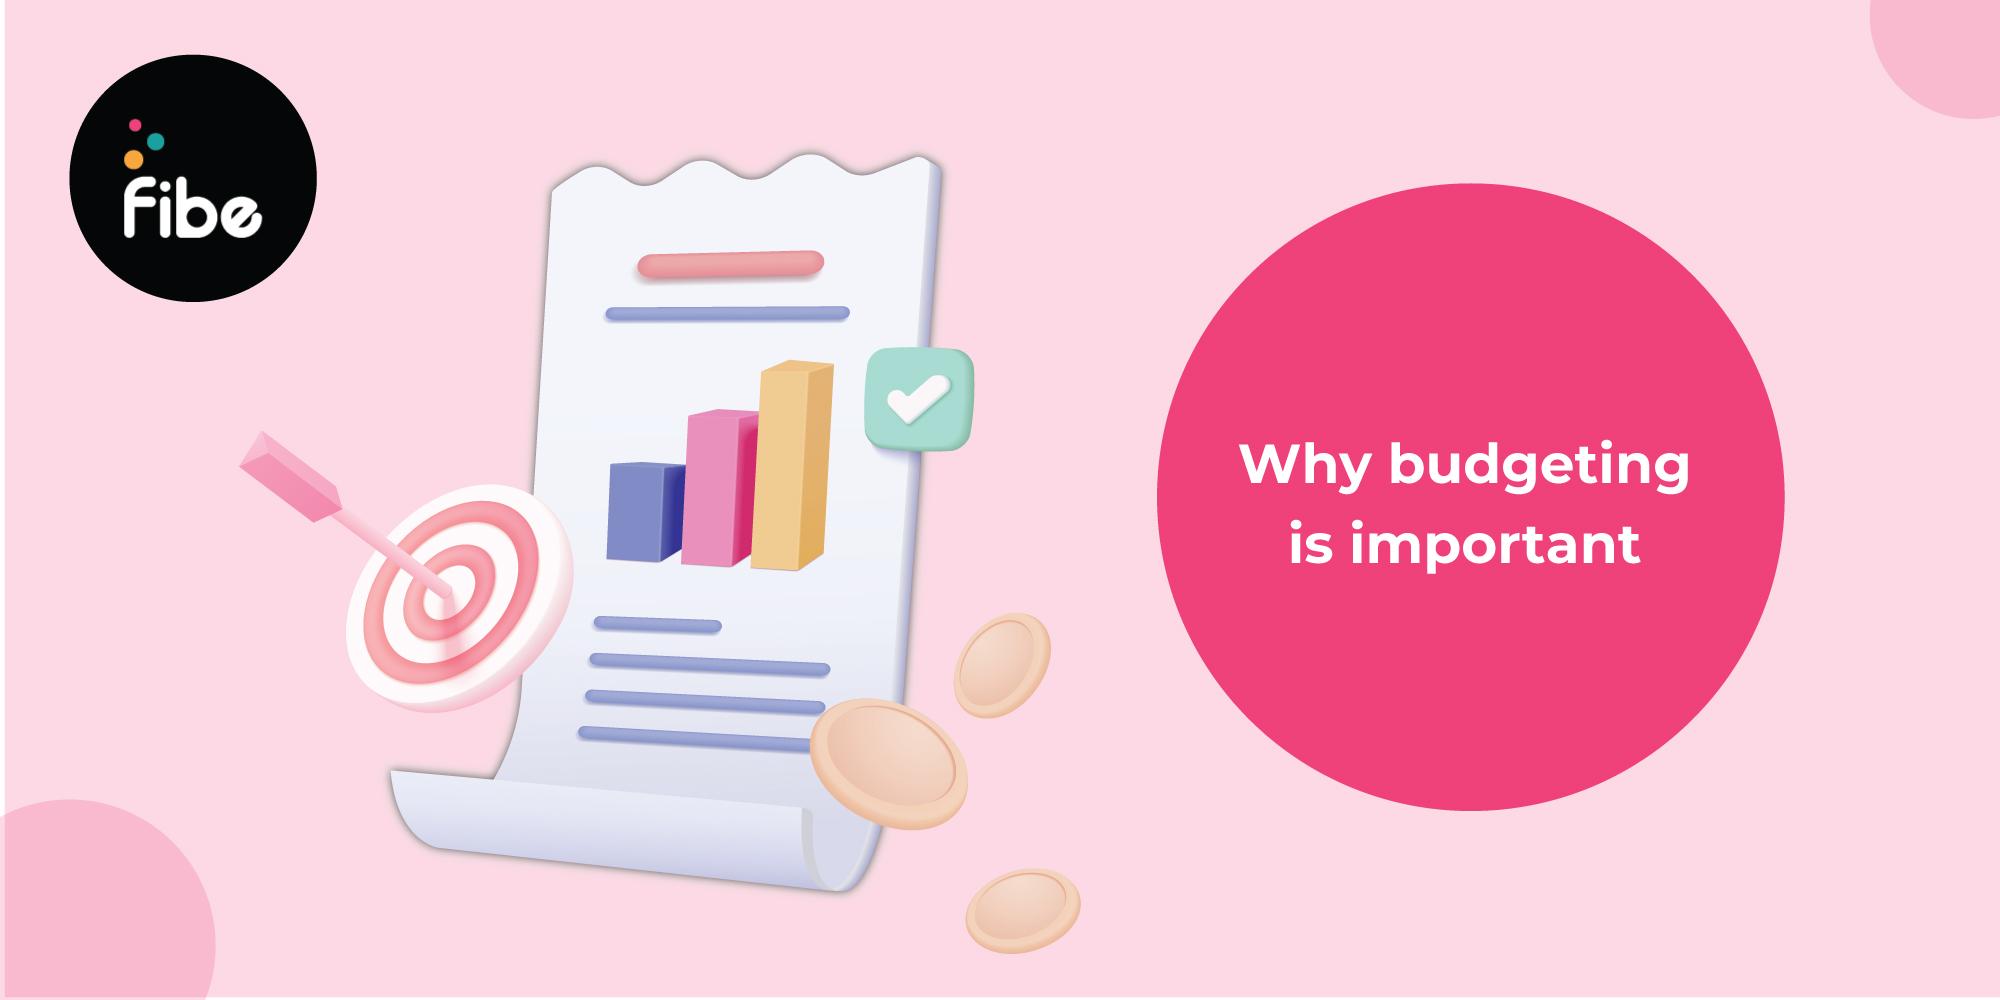 Why and How to Make a Budget? Important reasons and tips